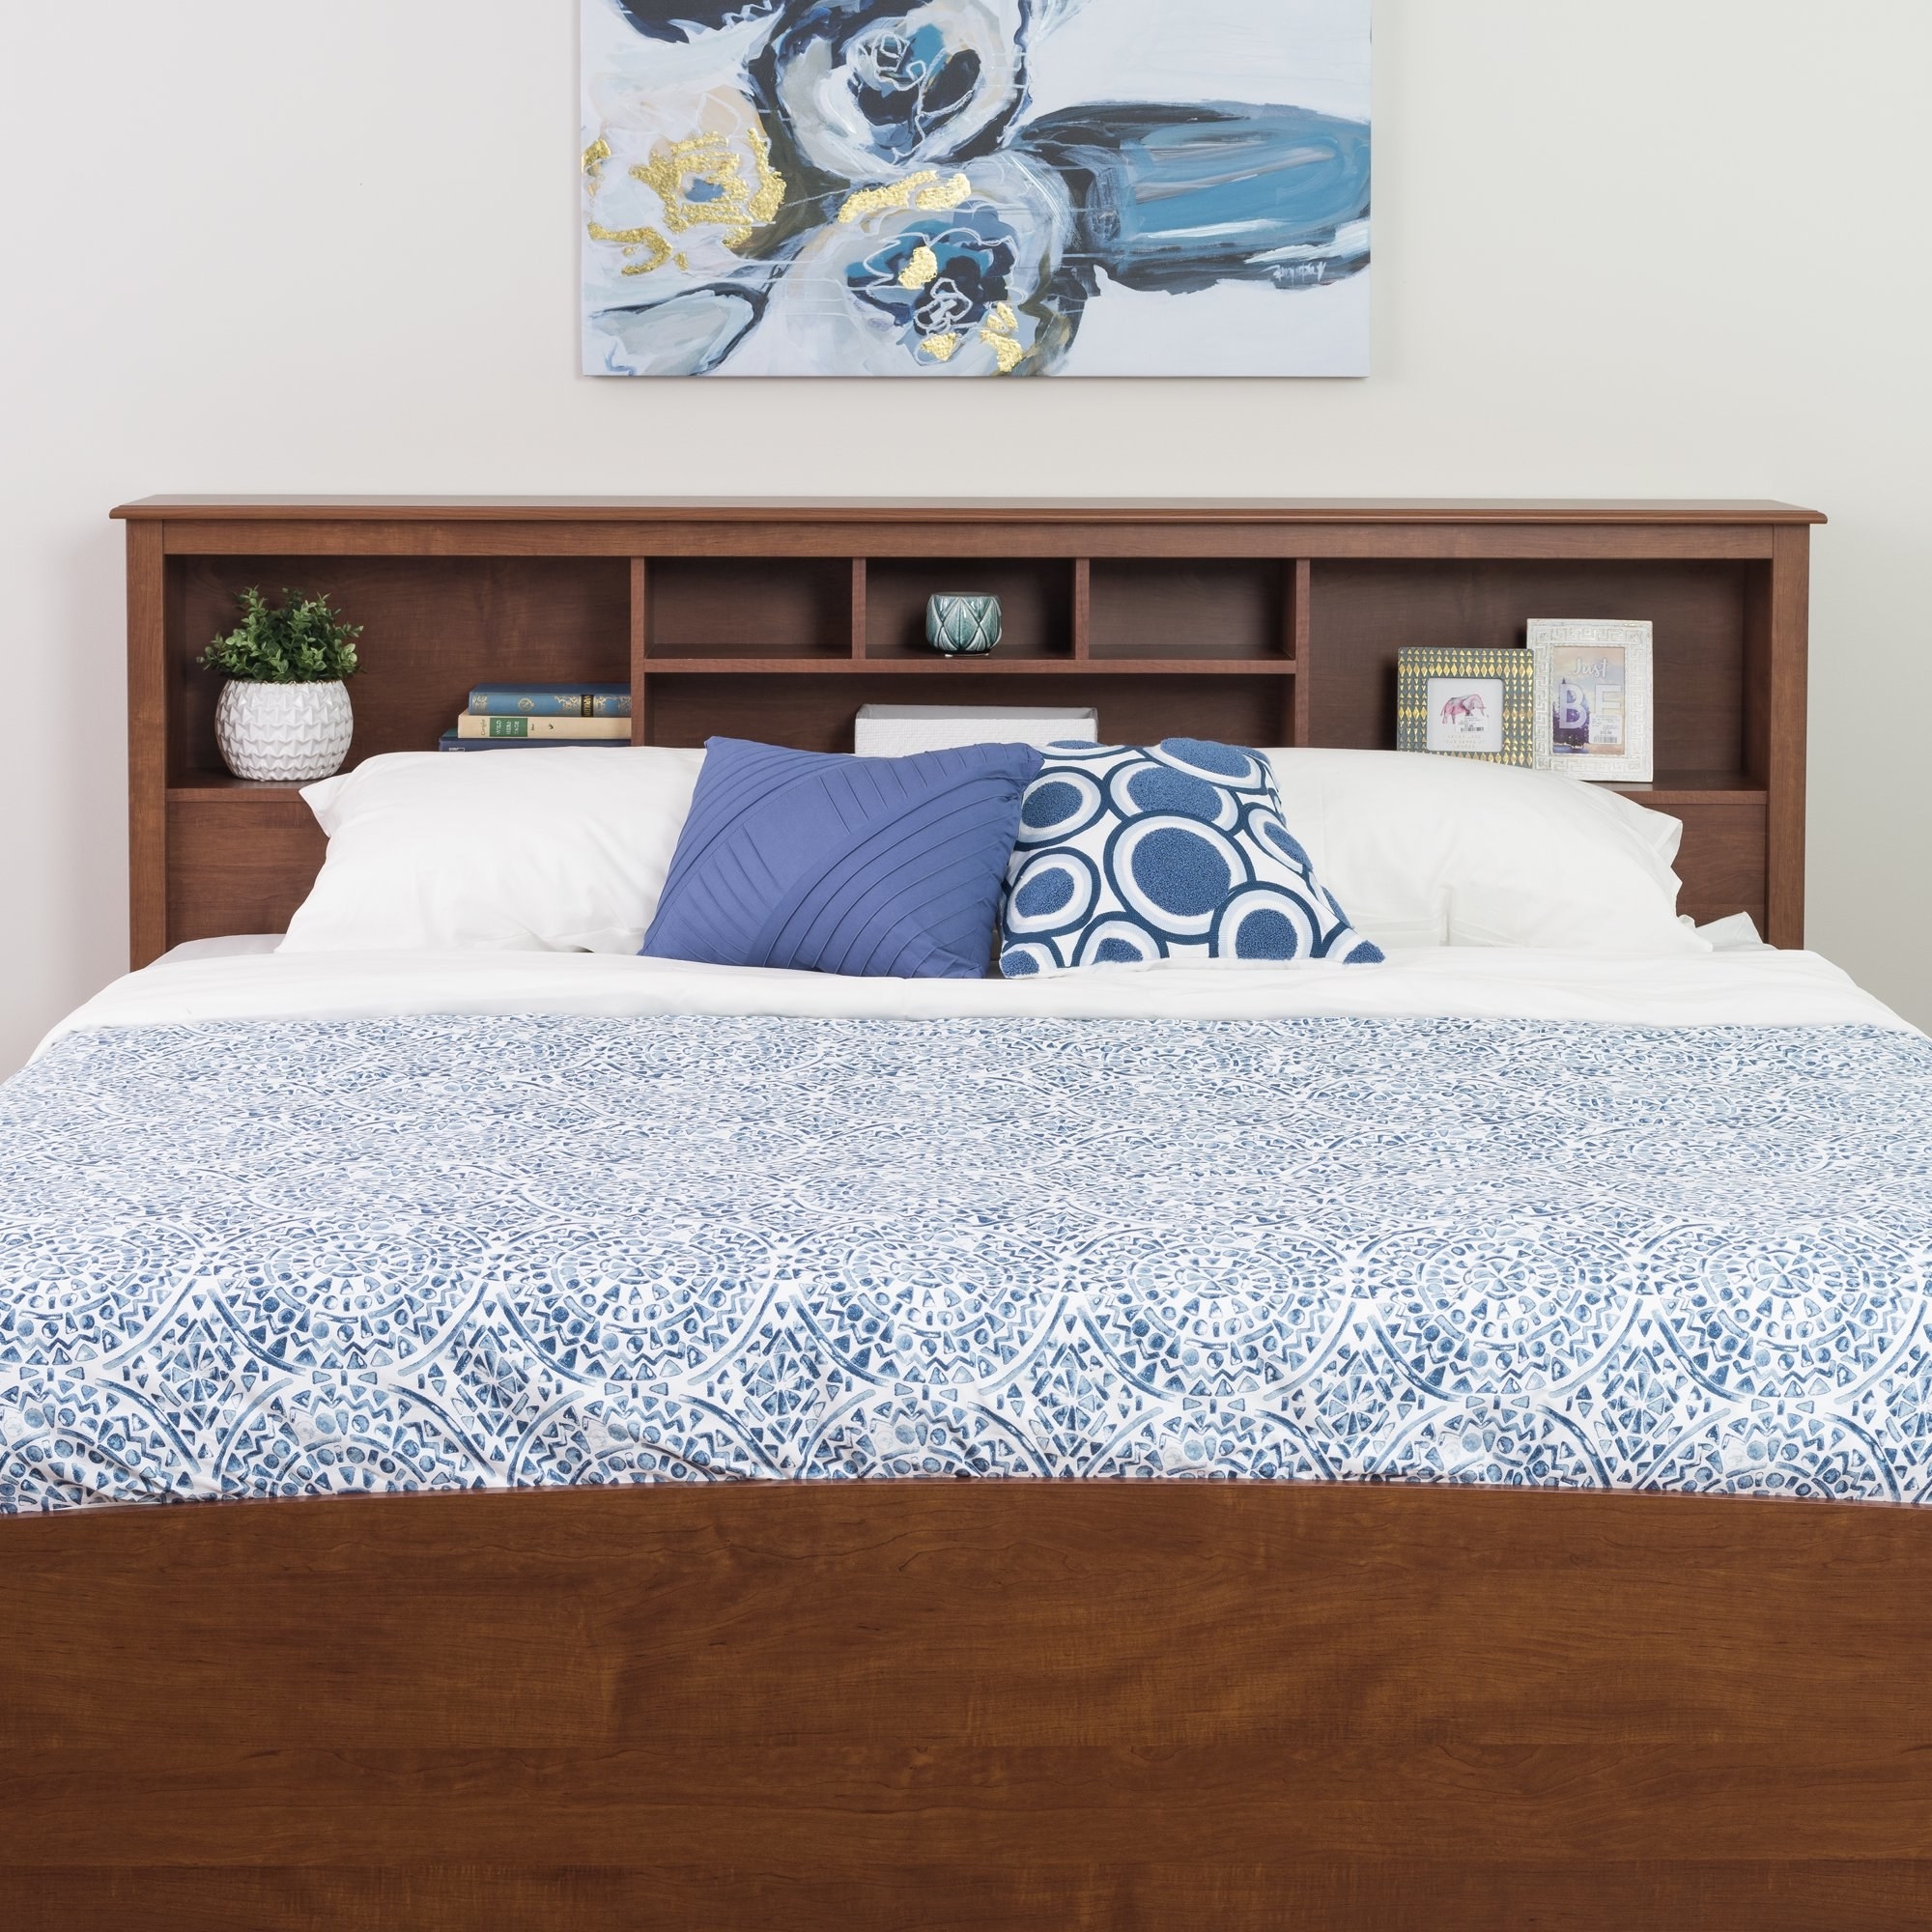 the cherry headboard with a bed made with blue linens